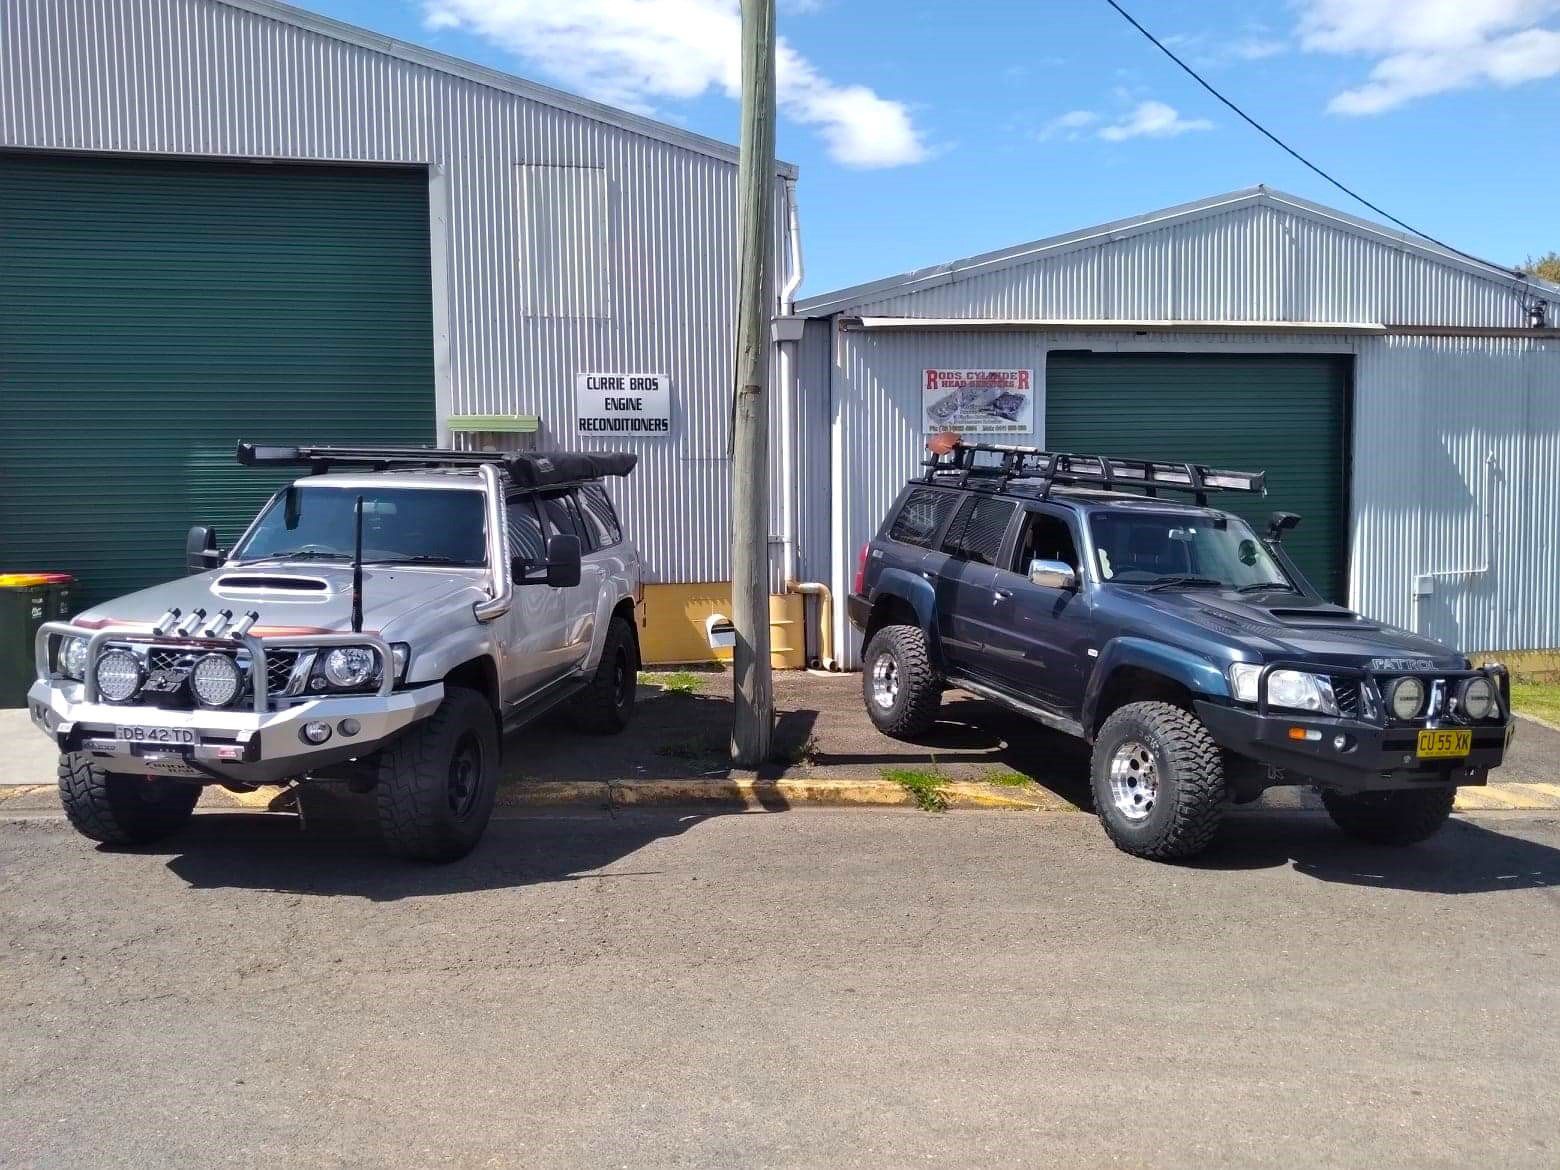 White Vehicle in Front of the Repair Shop — Engine Rebuilds in Taree, NSW